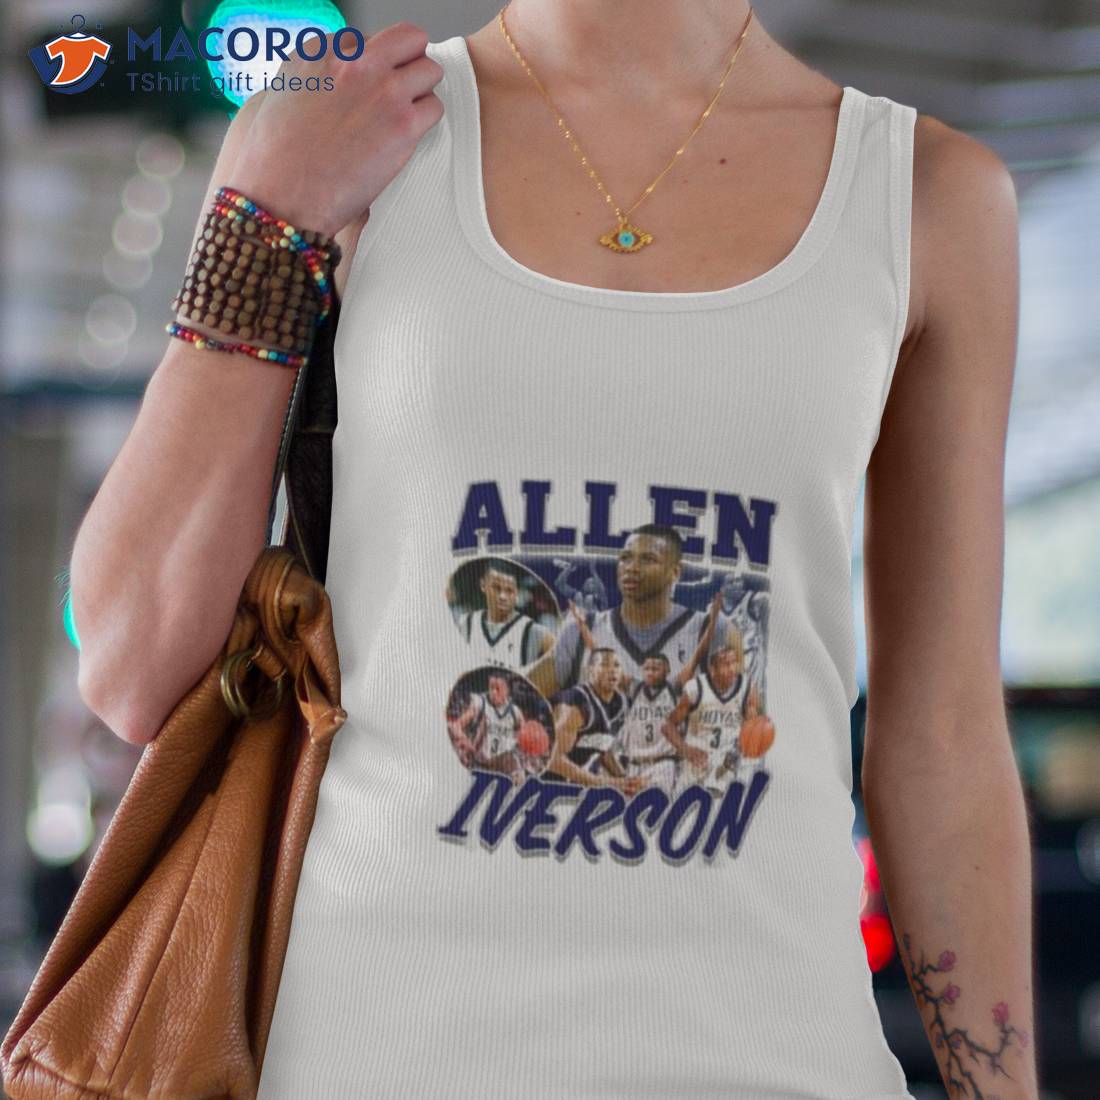 Allen Iverson The Naismith Memorial Basketball Hall Of Fame Shirt, hoodie,  longsleeve, sweater